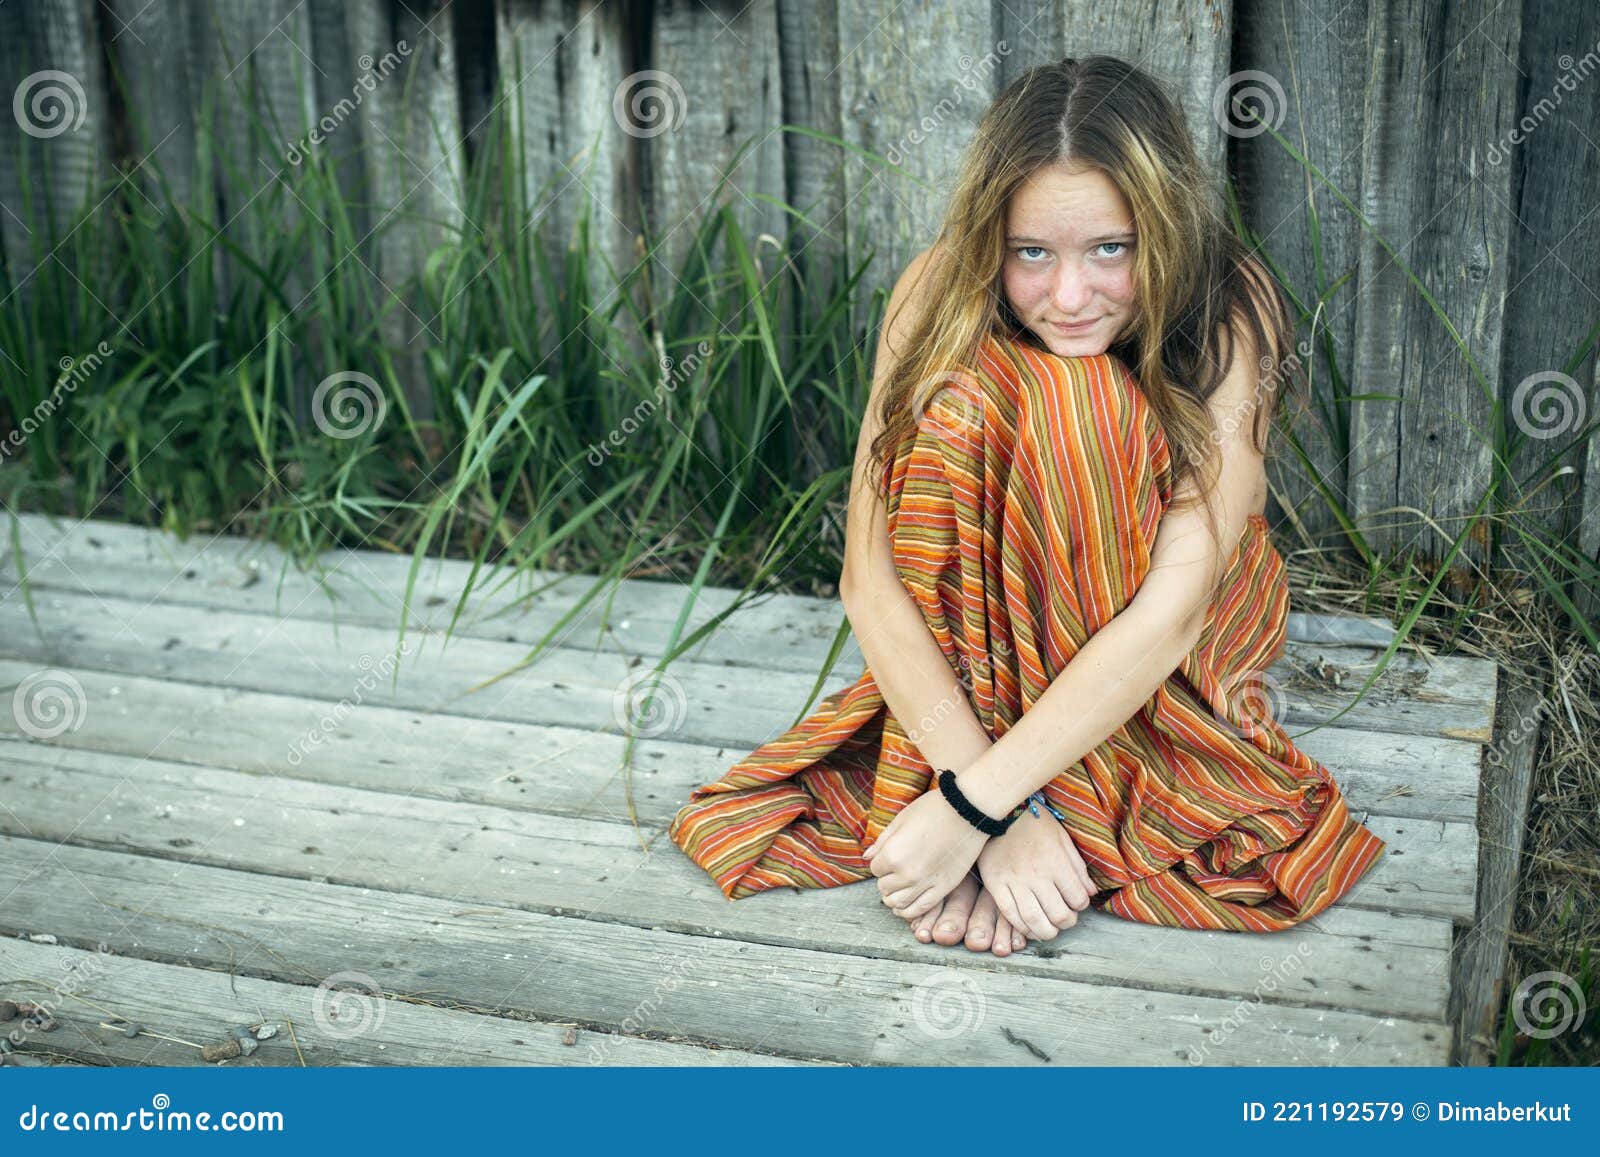 Charming Country Girl in the Outdoor in the Village. Stock Image ...